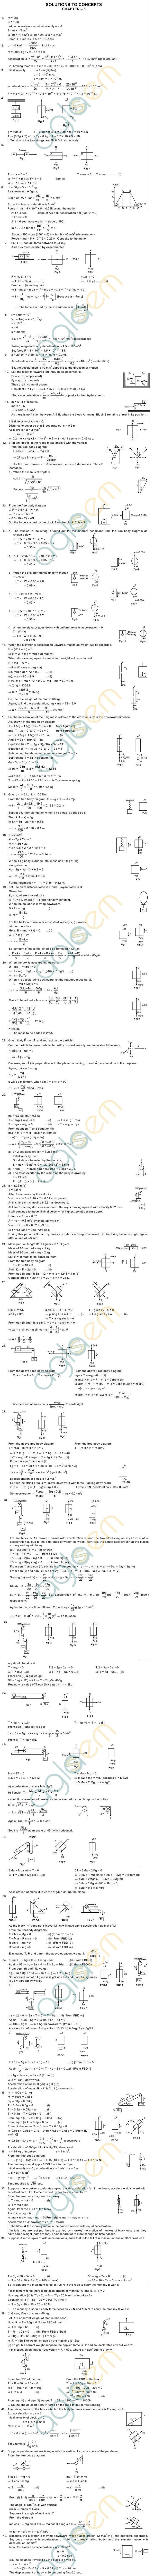 HC Verma Solutions: Chapter 5 - Newton’s Laws of Motion